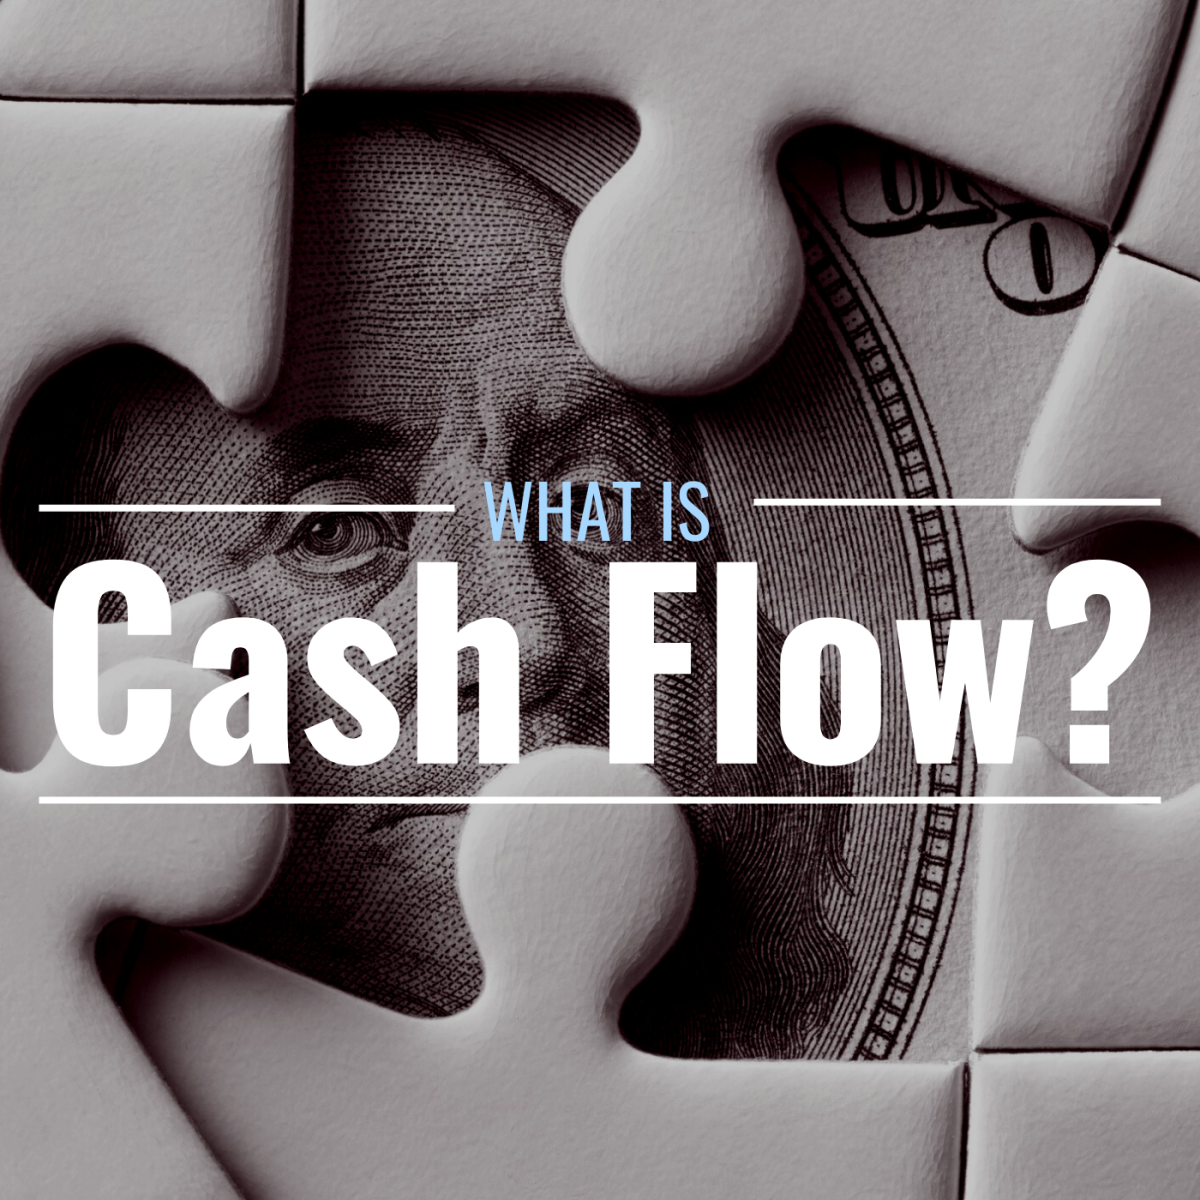 Puzzle pieces with the face of a $100 dollar bill peeking through with the text overlay "What Is Cash Flow?"